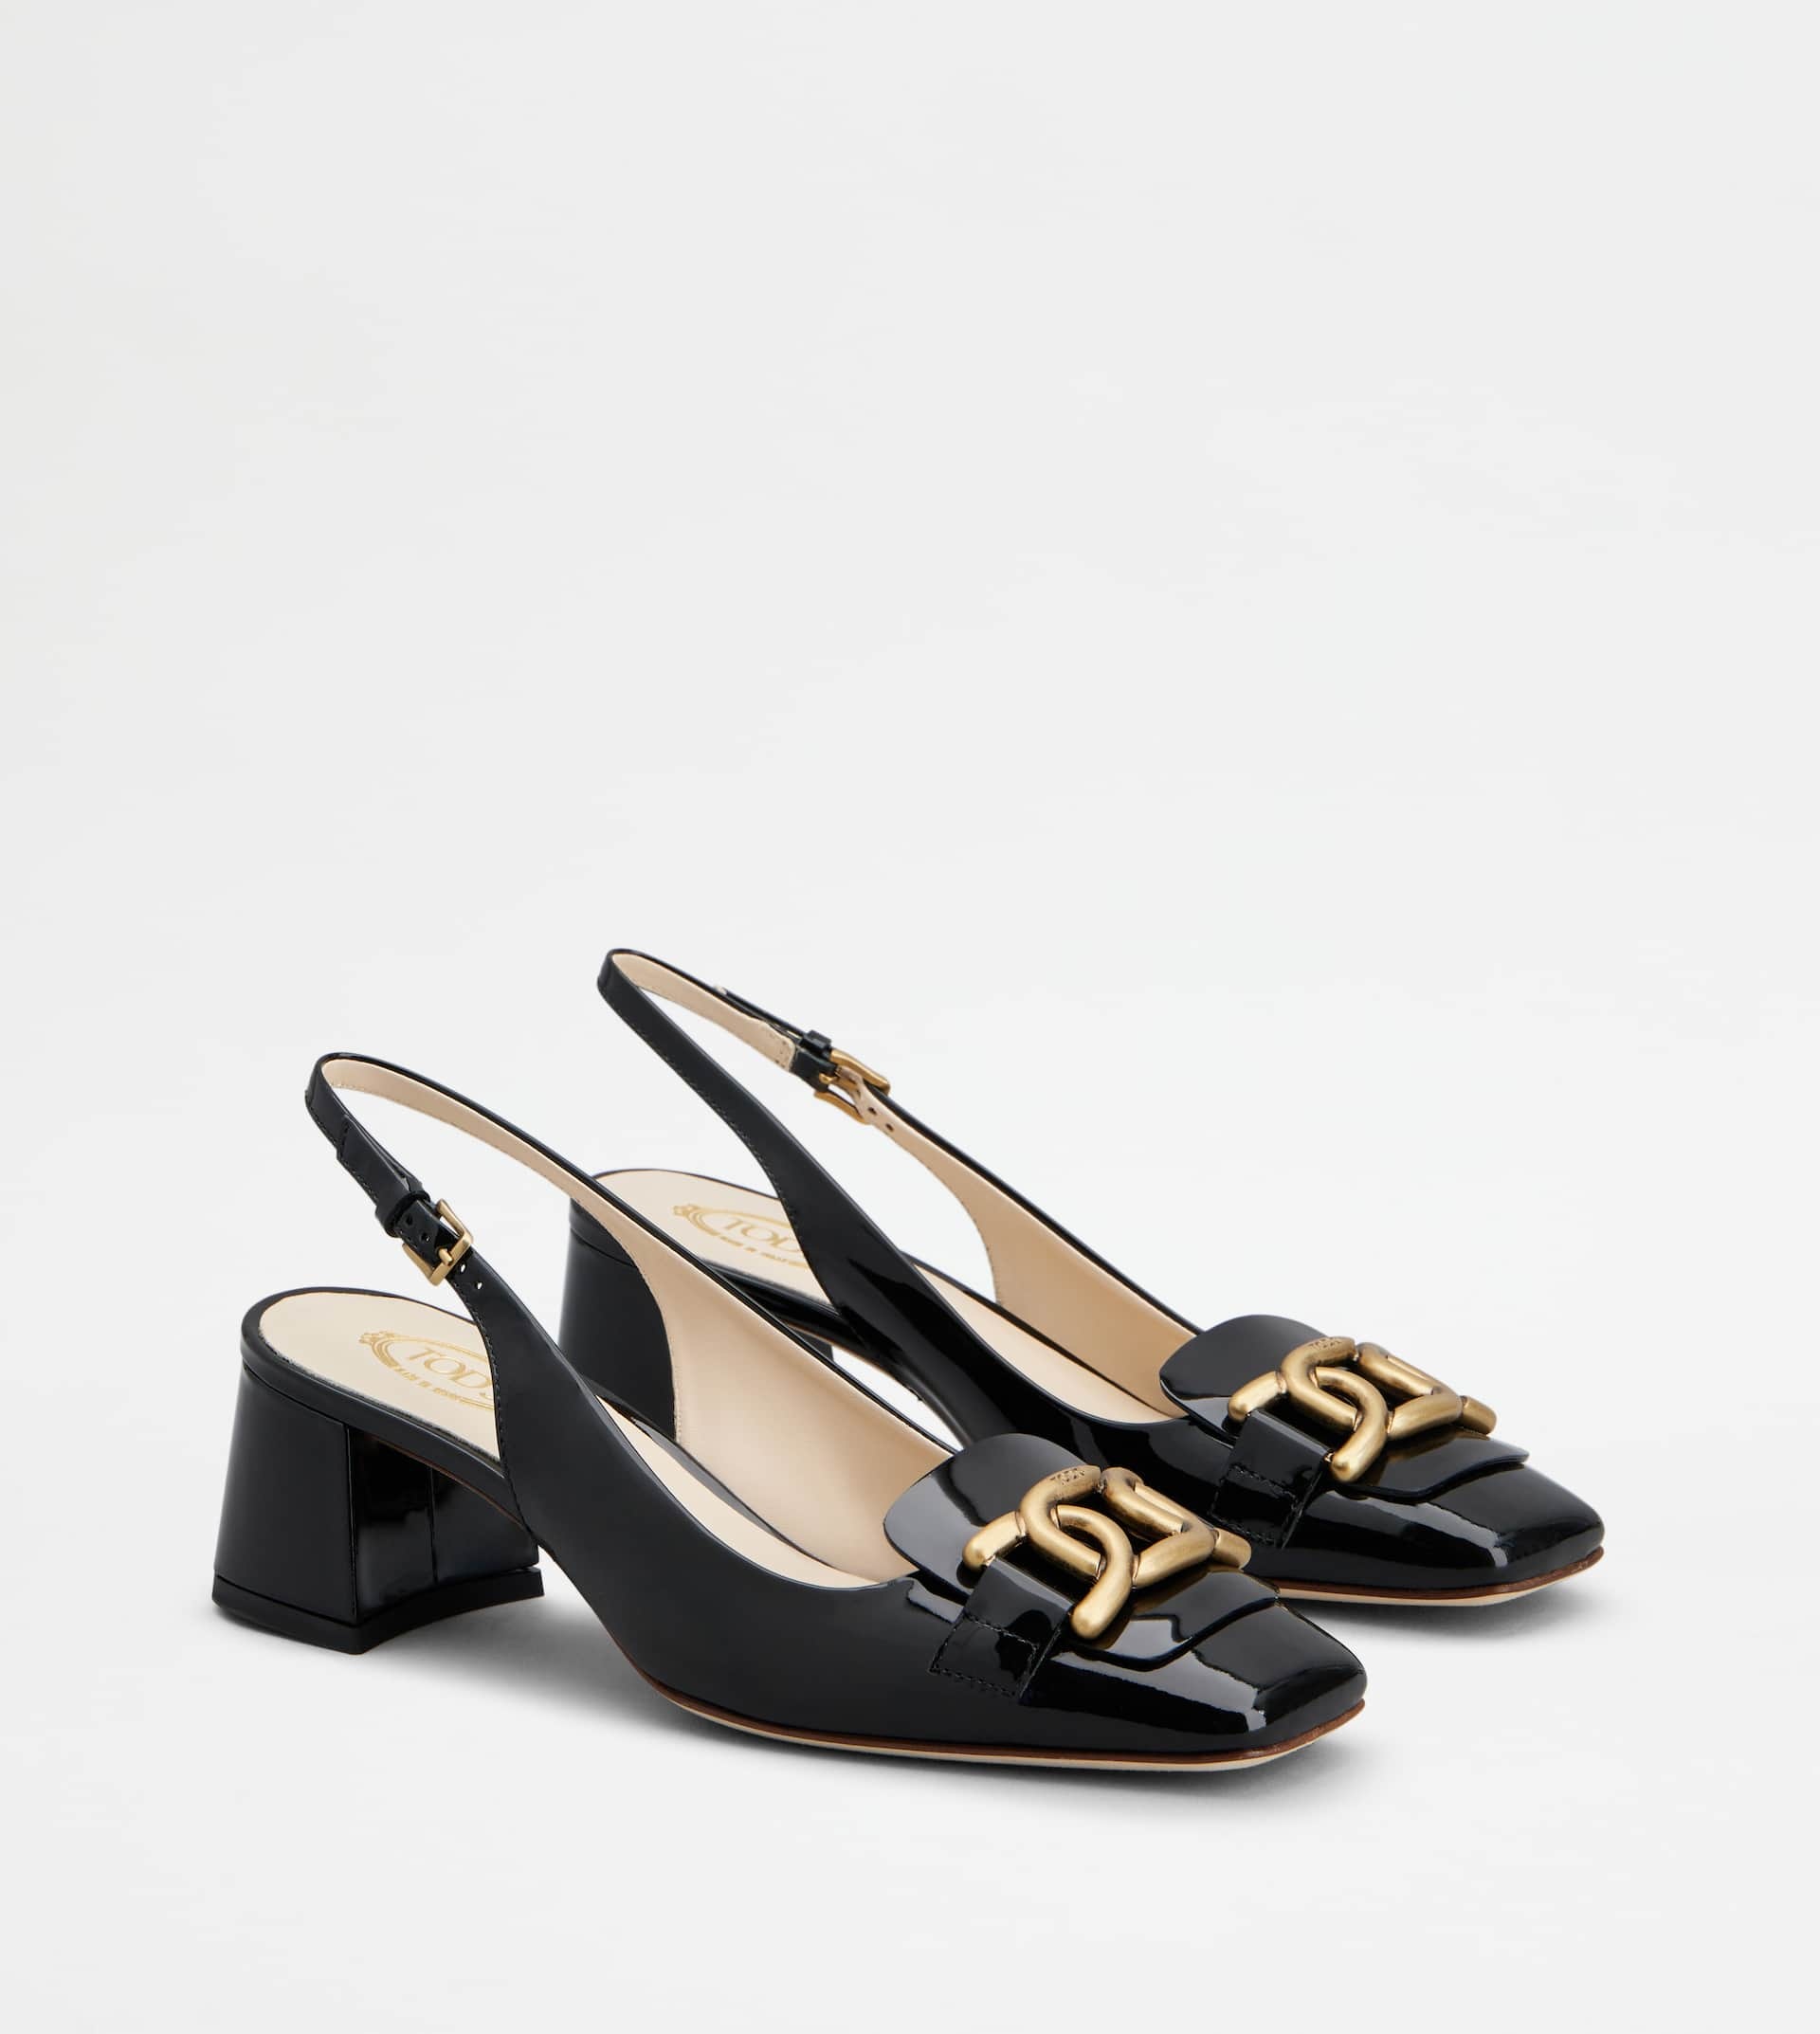 KATE SLINGBACK PUMPS IN PATENT LEATHER - BLACK - 3